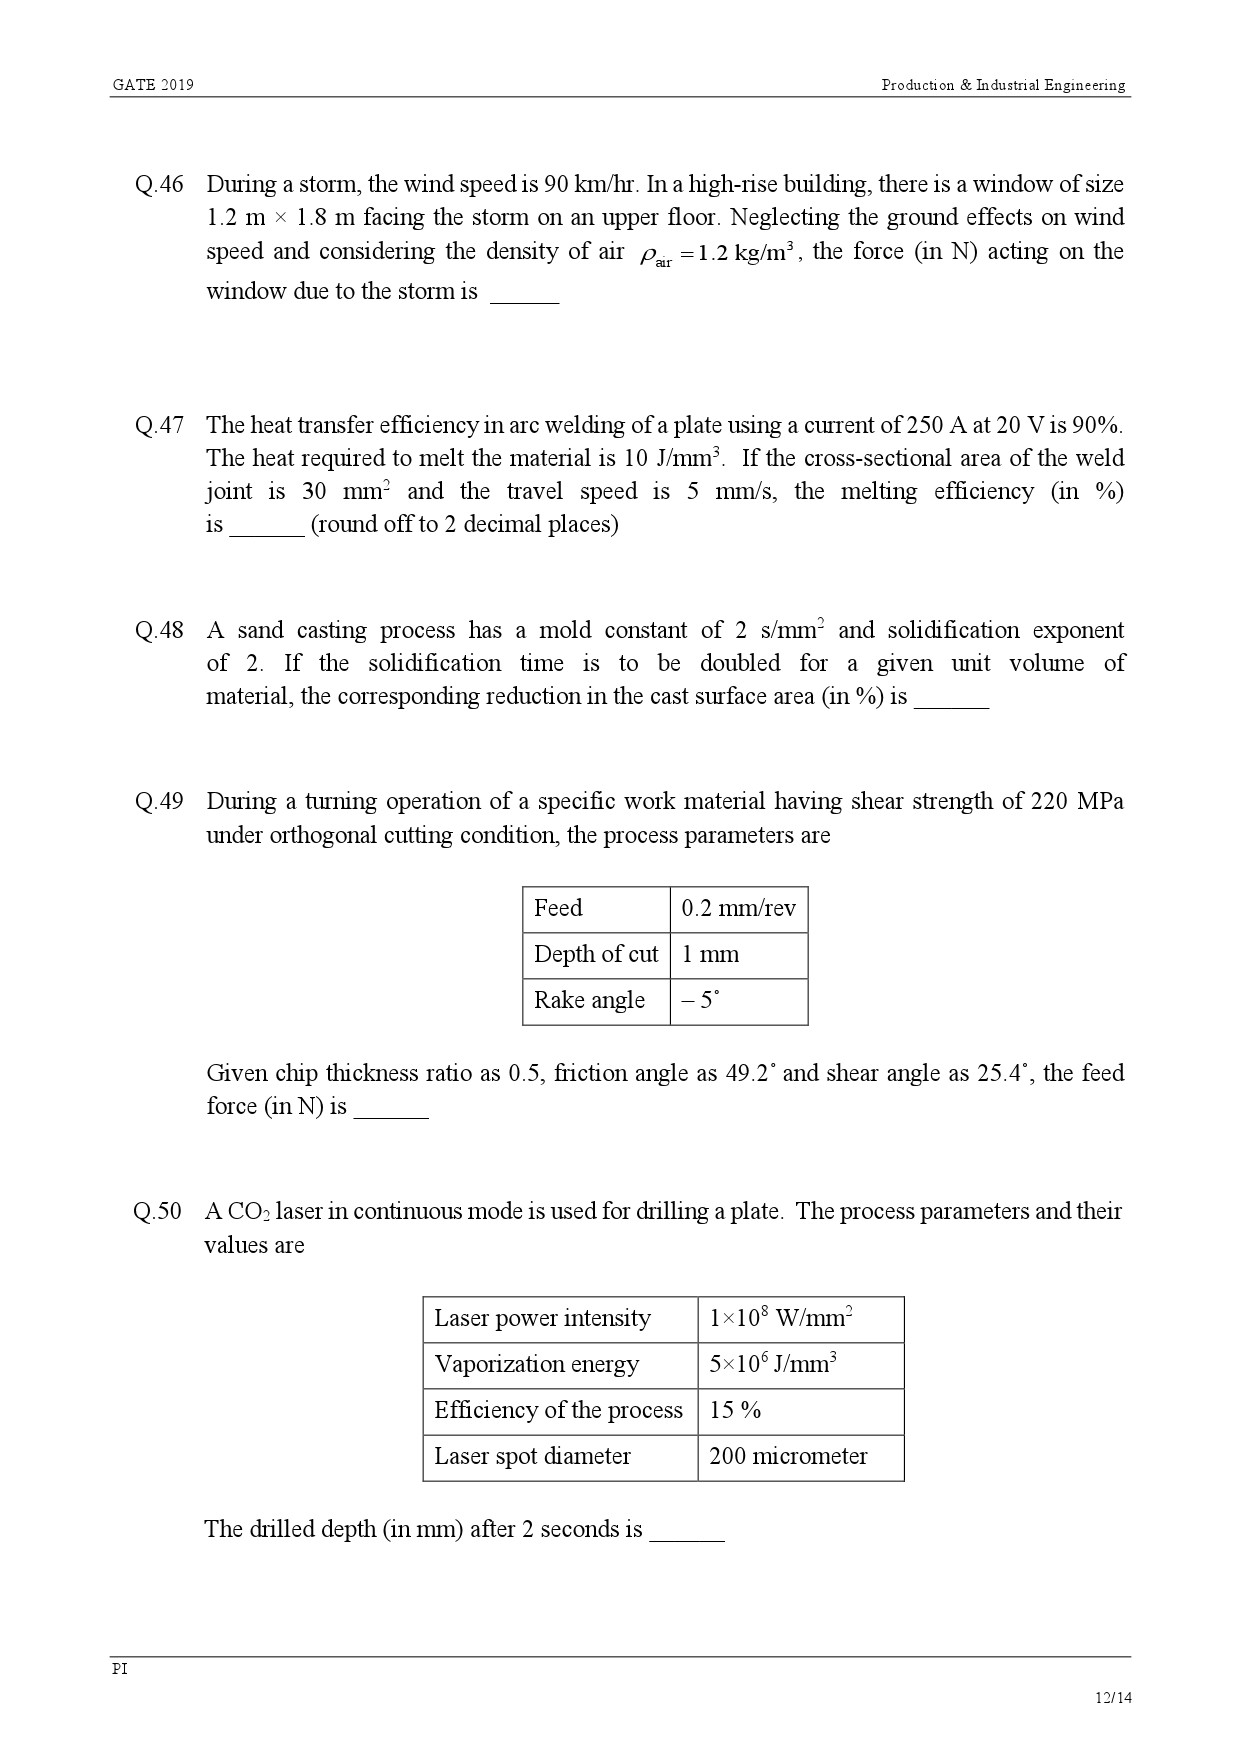 GATE Exam Question Paper 2019 Production and Industrial Engineering 15